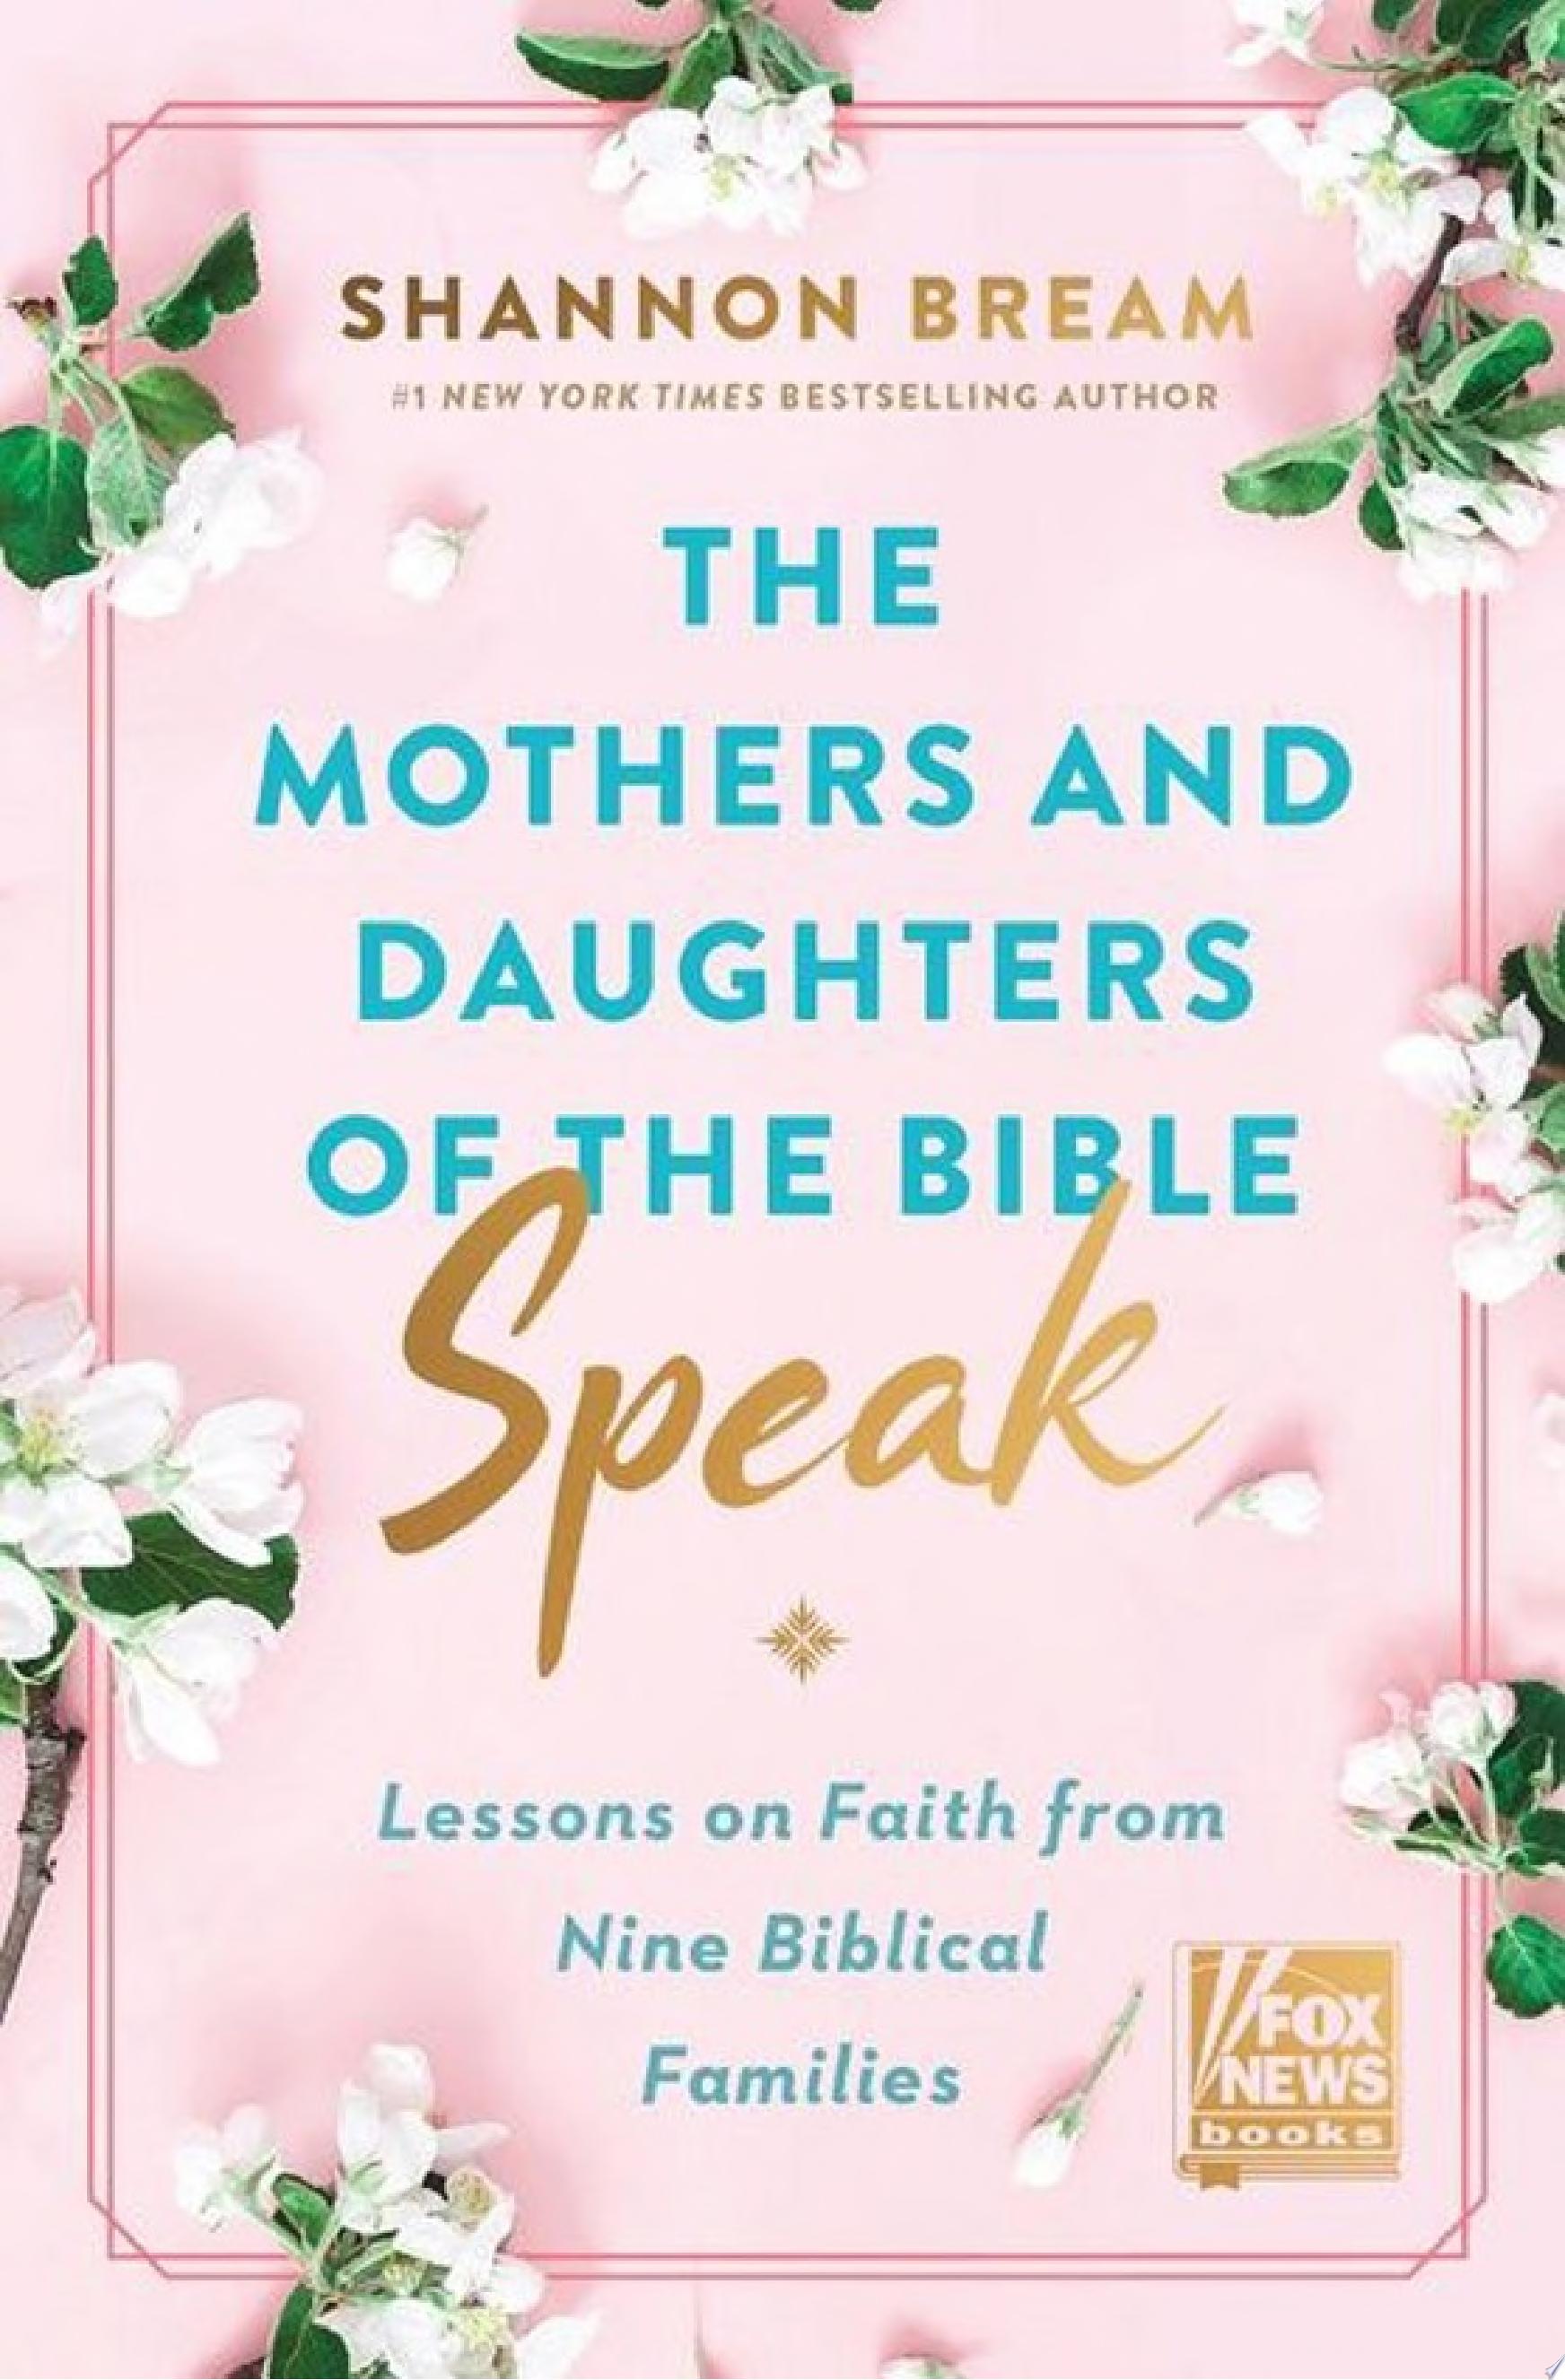 Image for "The Mothers and Daughters of the Bible Speak"